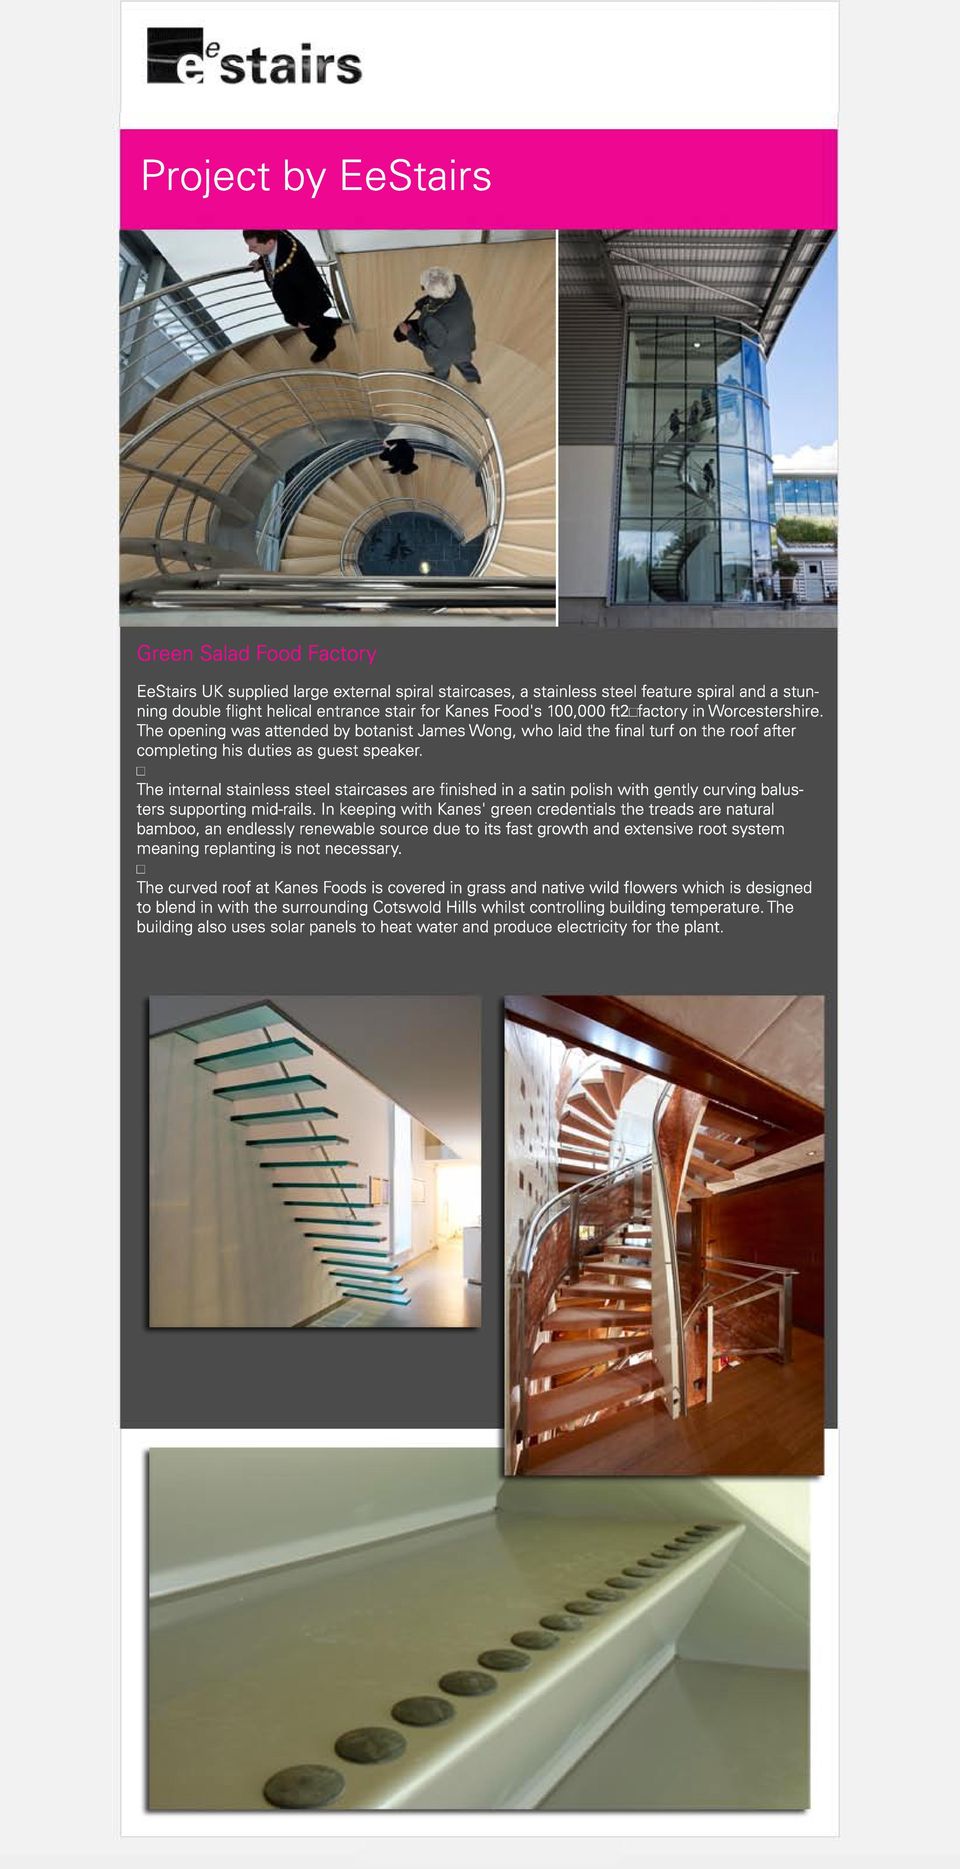 The internal stainless steel staircases are finished in a satin polish with gently curving balusters supporting mid-rails.